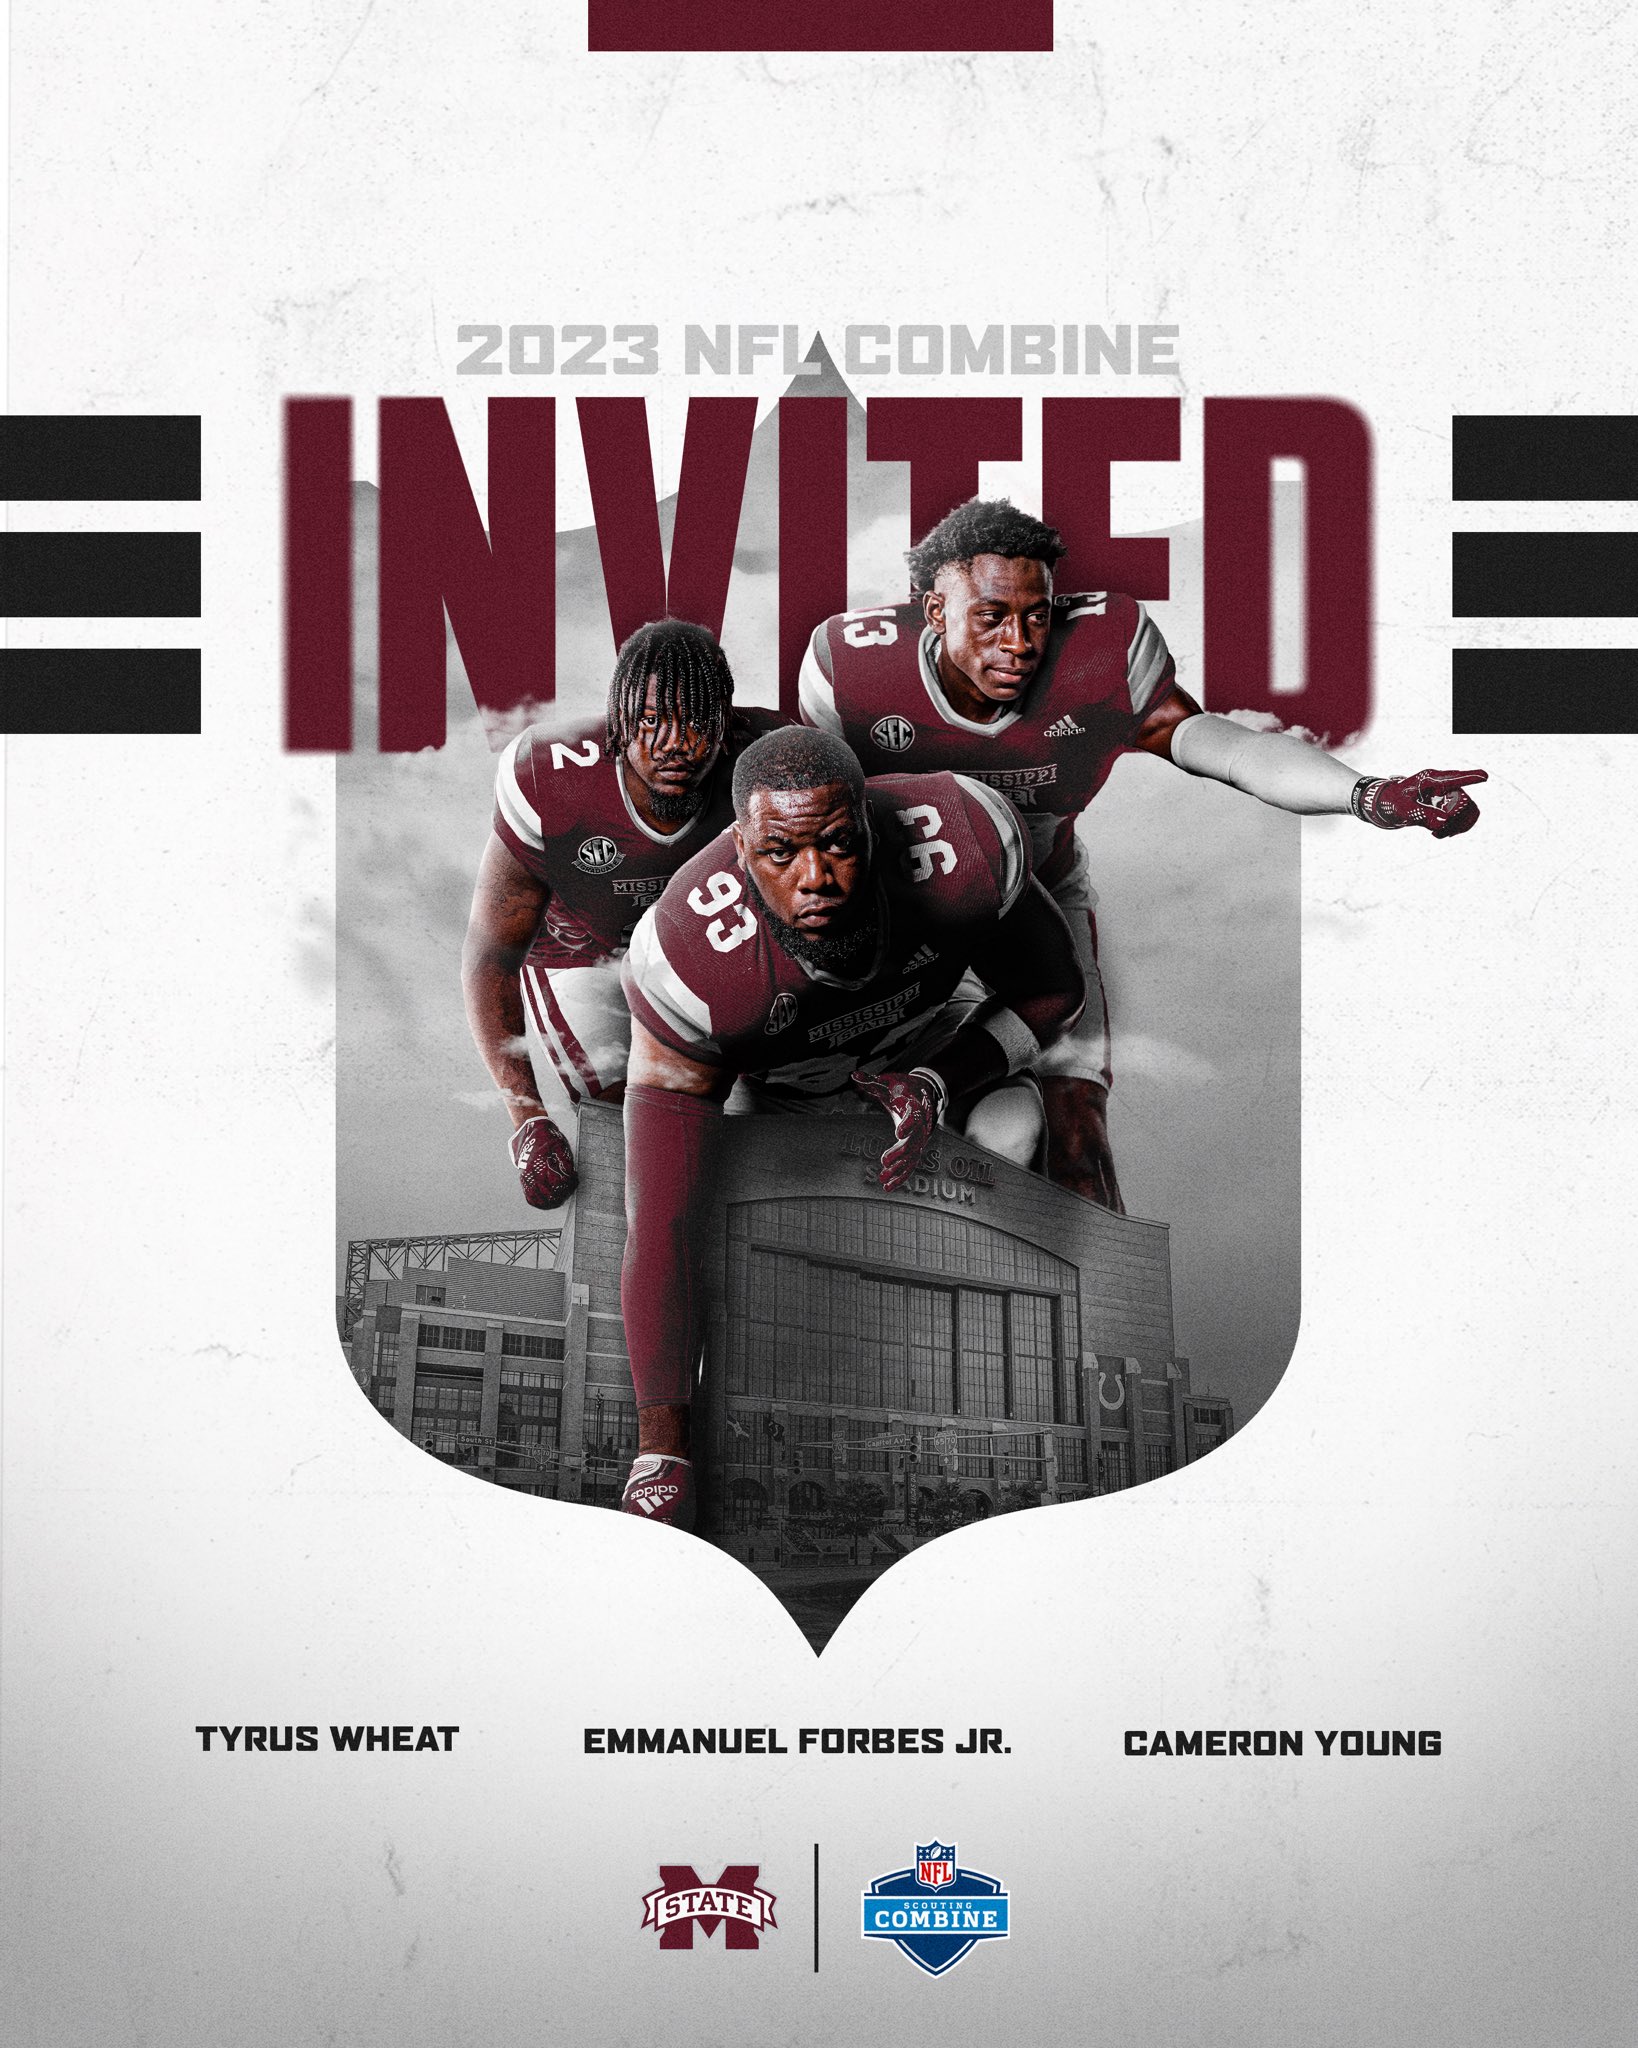 Mississippi State Football on Twitter: 2021 NFL Combine Invite ☑️ ▪️  @Im3Fly ▪️ @H_Kylin ▪️ @Bigspencer421 This year's @NFL Combine will be  conducted in a virtual format. Our Pro Day will be